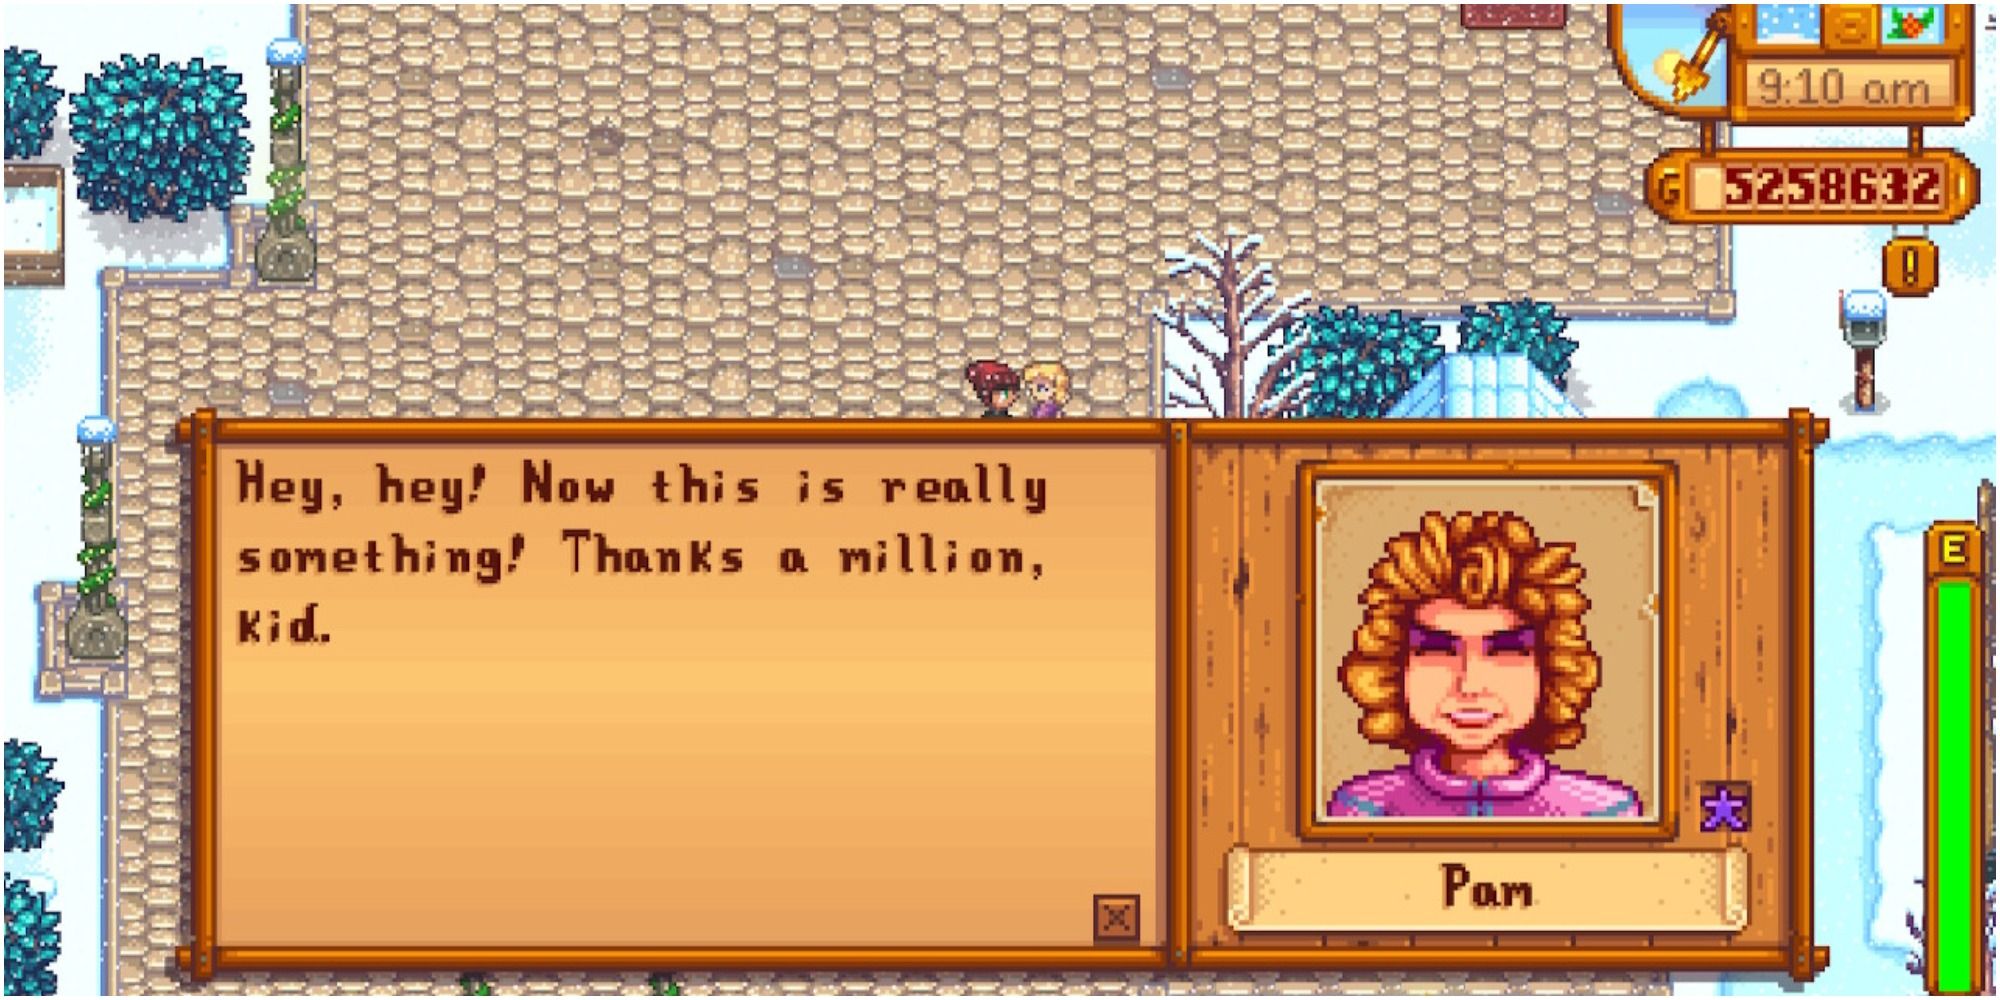 Stardew Valley: The dialogue screen after giving Pam a loved gift.